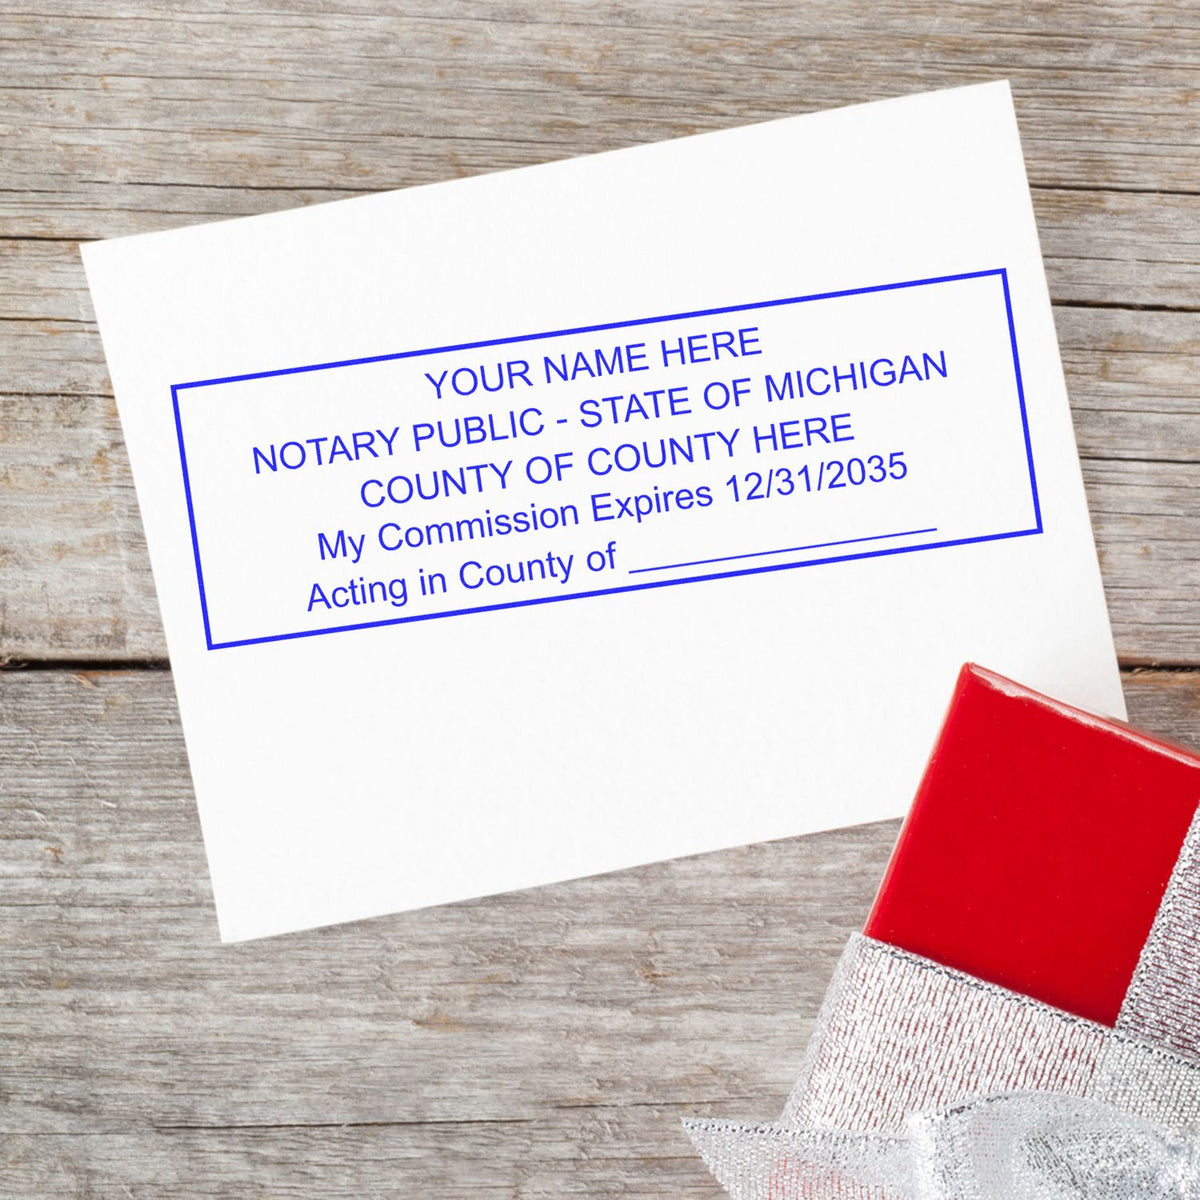 The PSI Michigan Notary Stamp stamp impression comes to life with a crisp, detailed photo on paper - showcasing true professional quality.